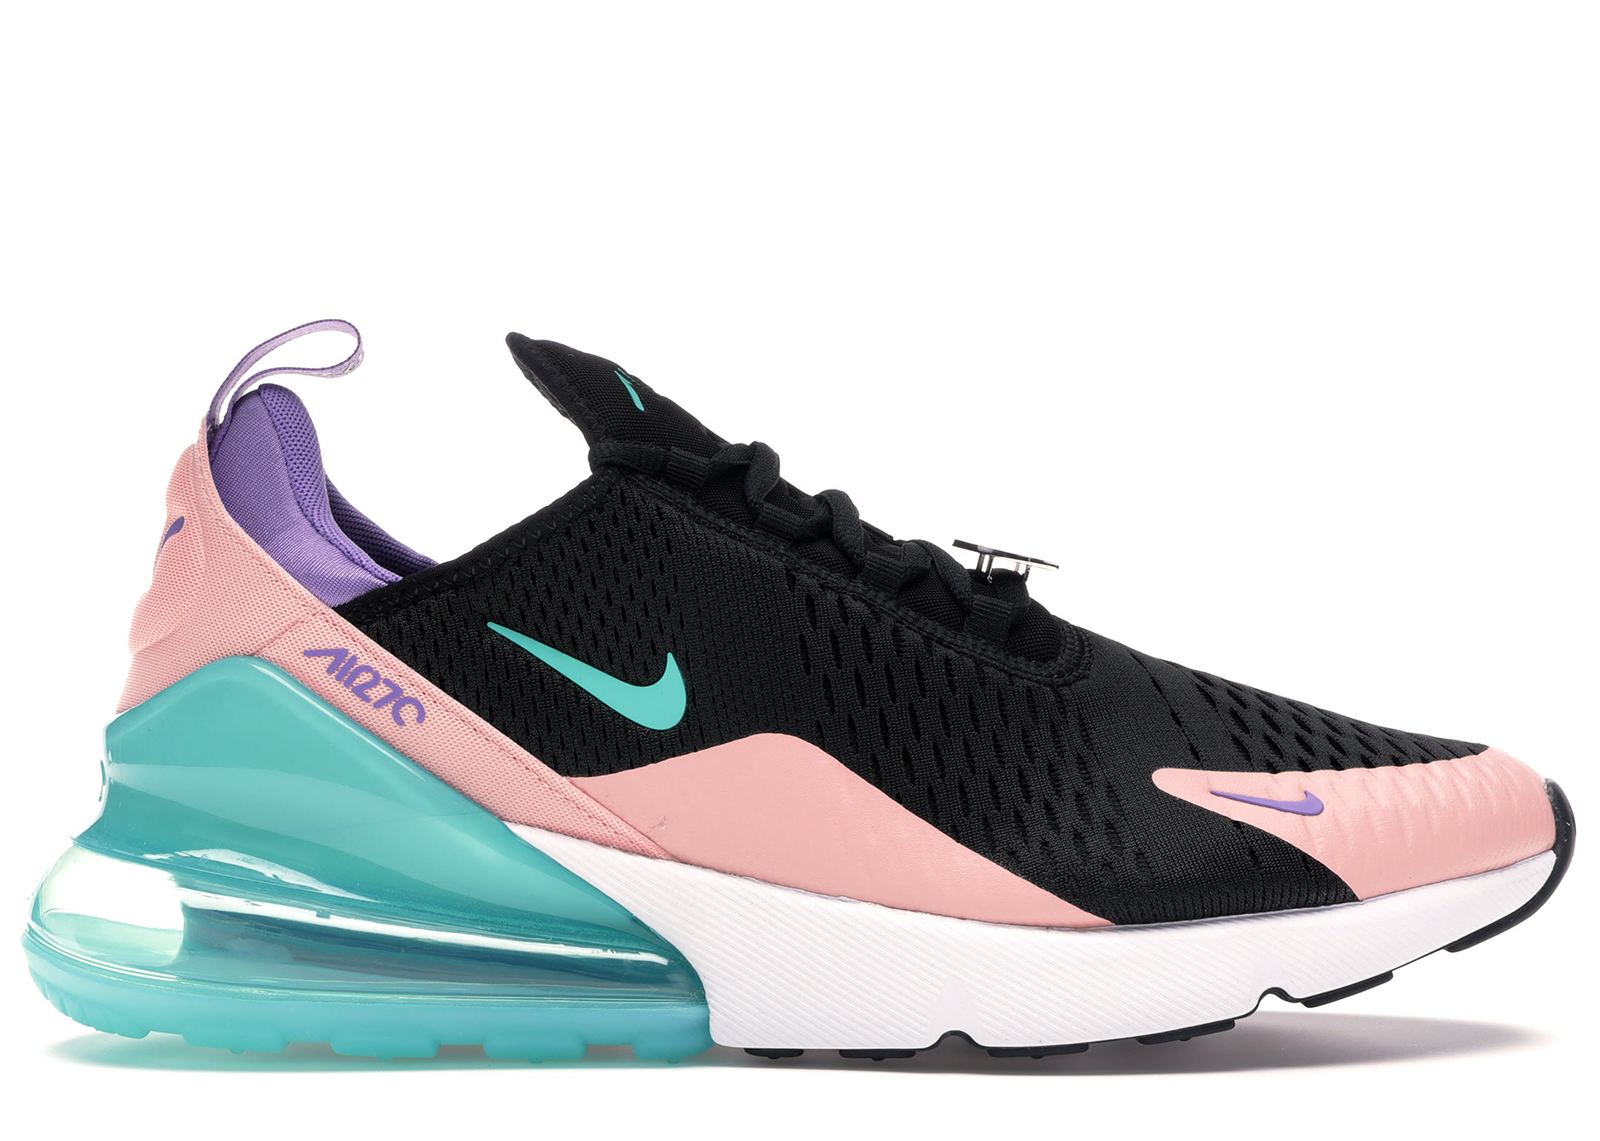 Nike Air Max 270 Have a Nike Day